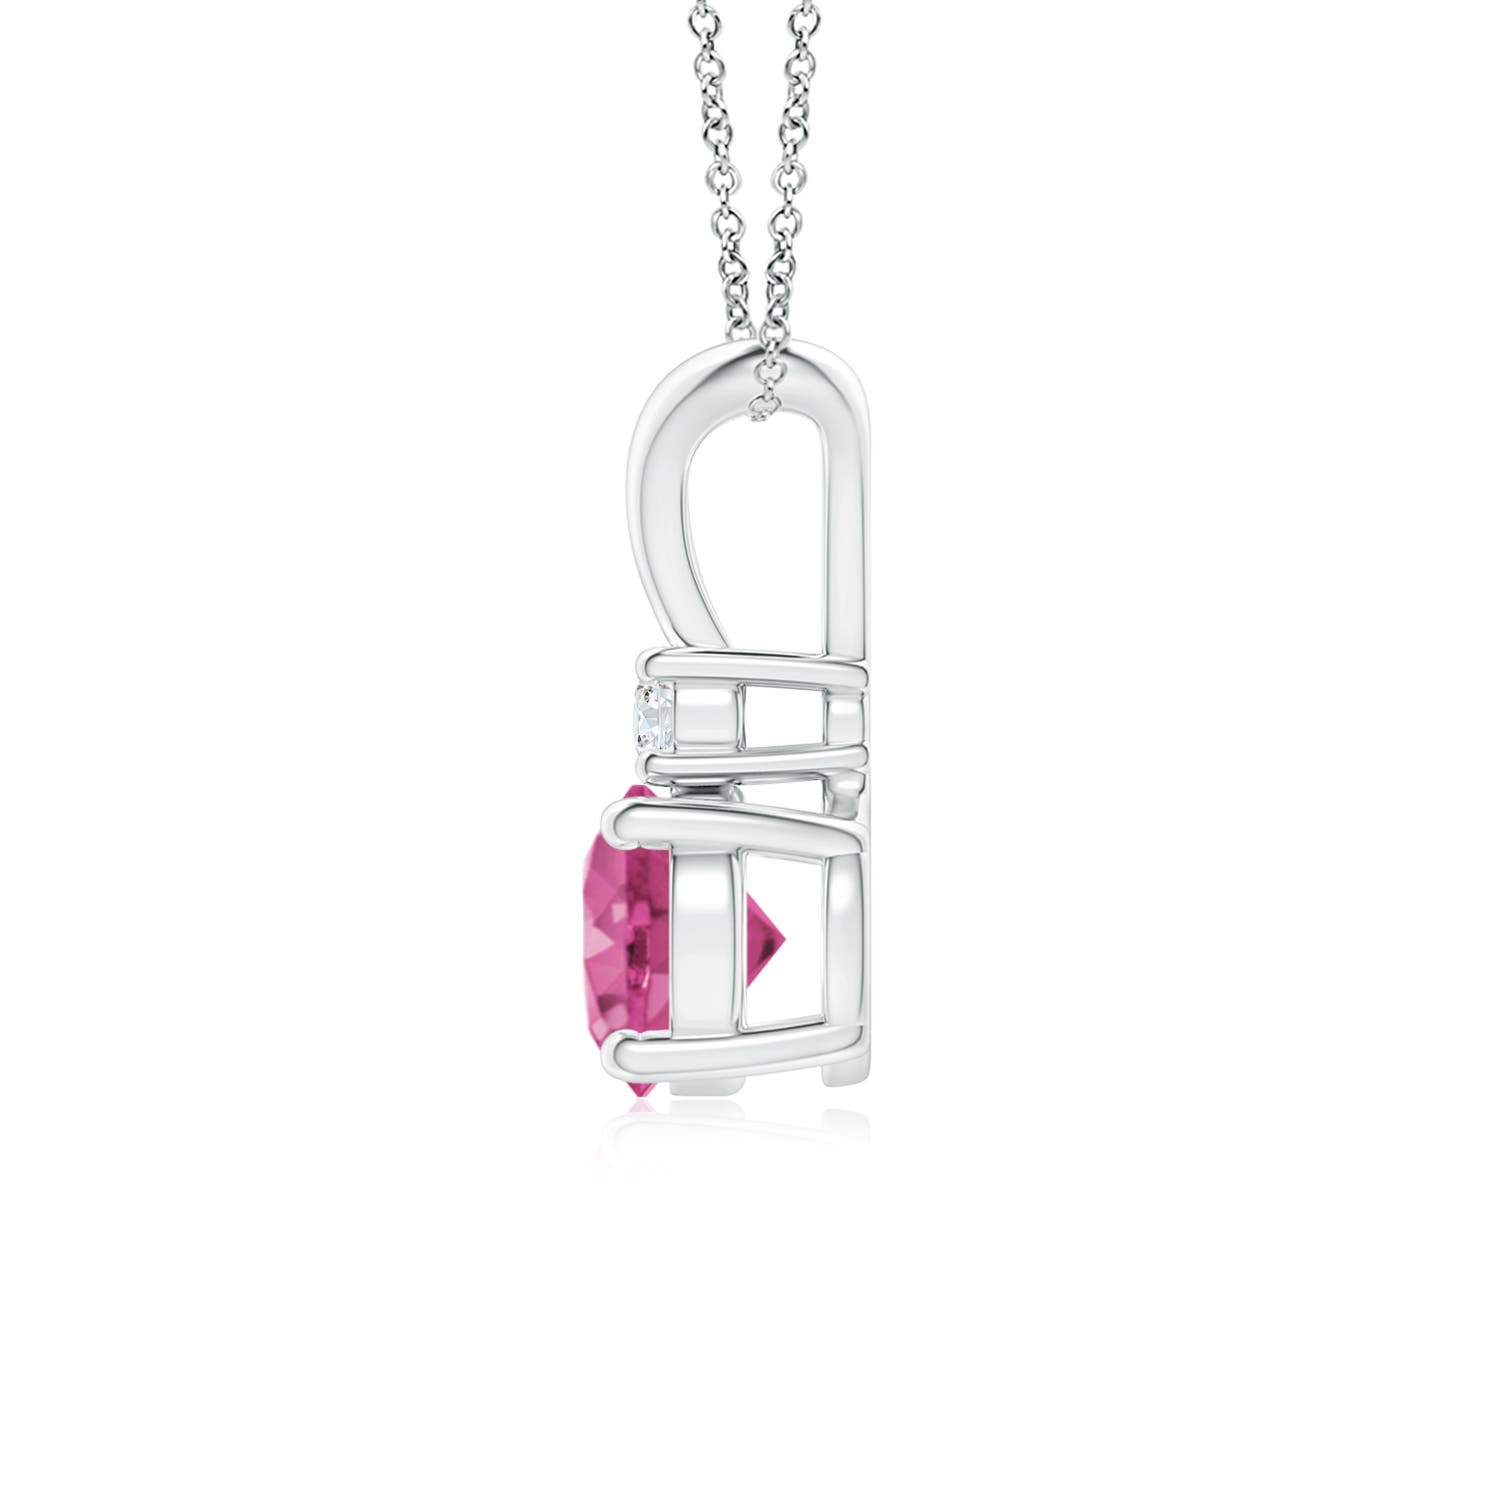 AAAA - Pink Sapphire / 1.04 CT / 14 KT White Gold